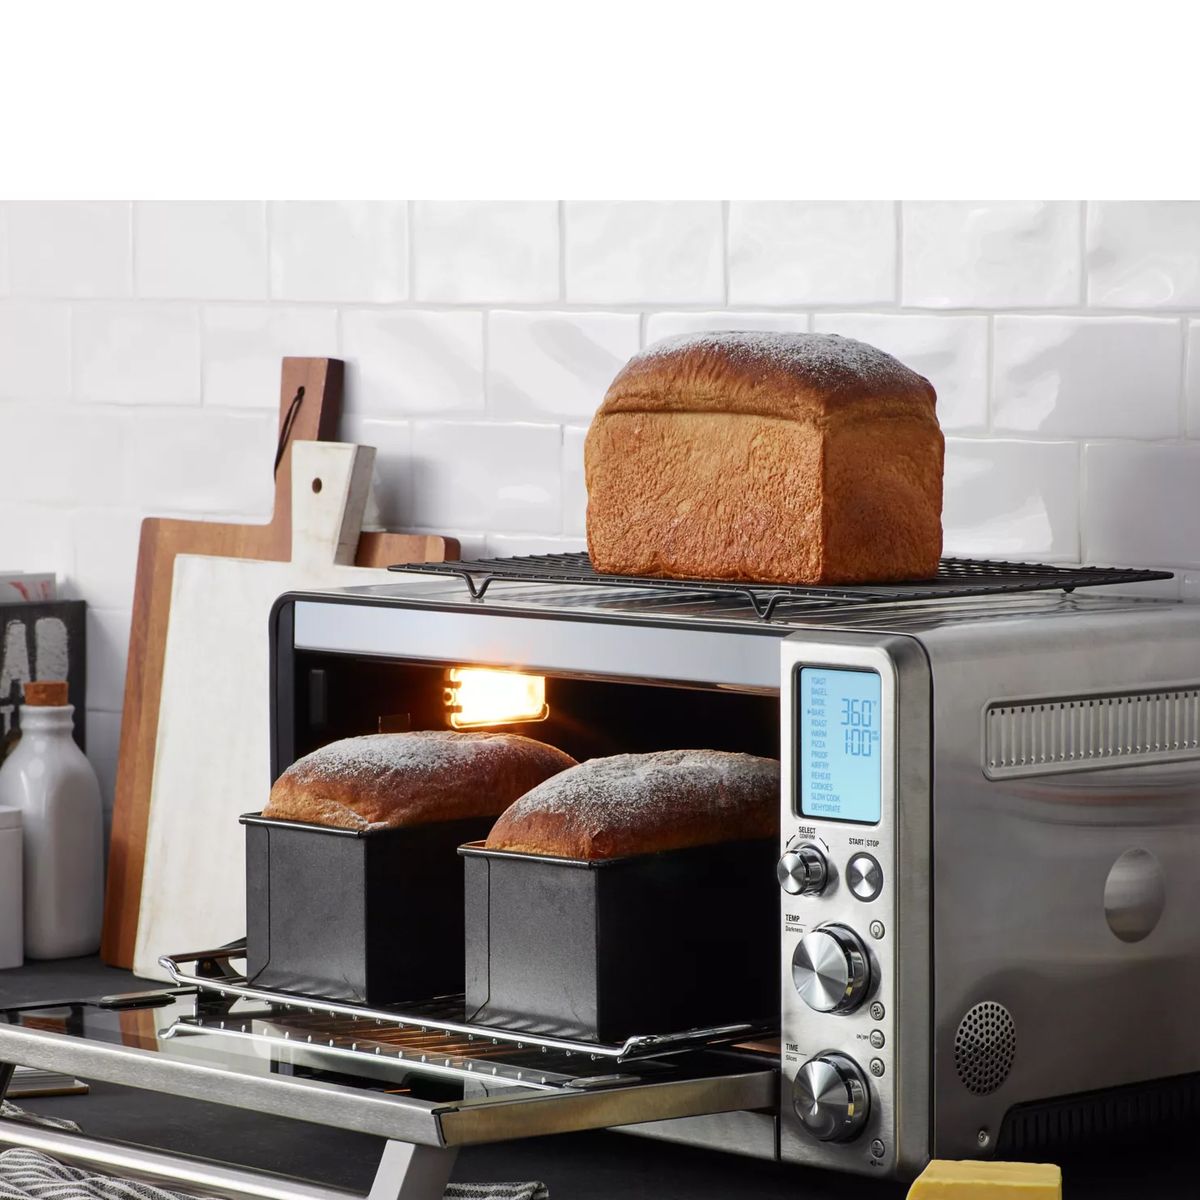 Mini Oven For Baking, Small Baking Oven